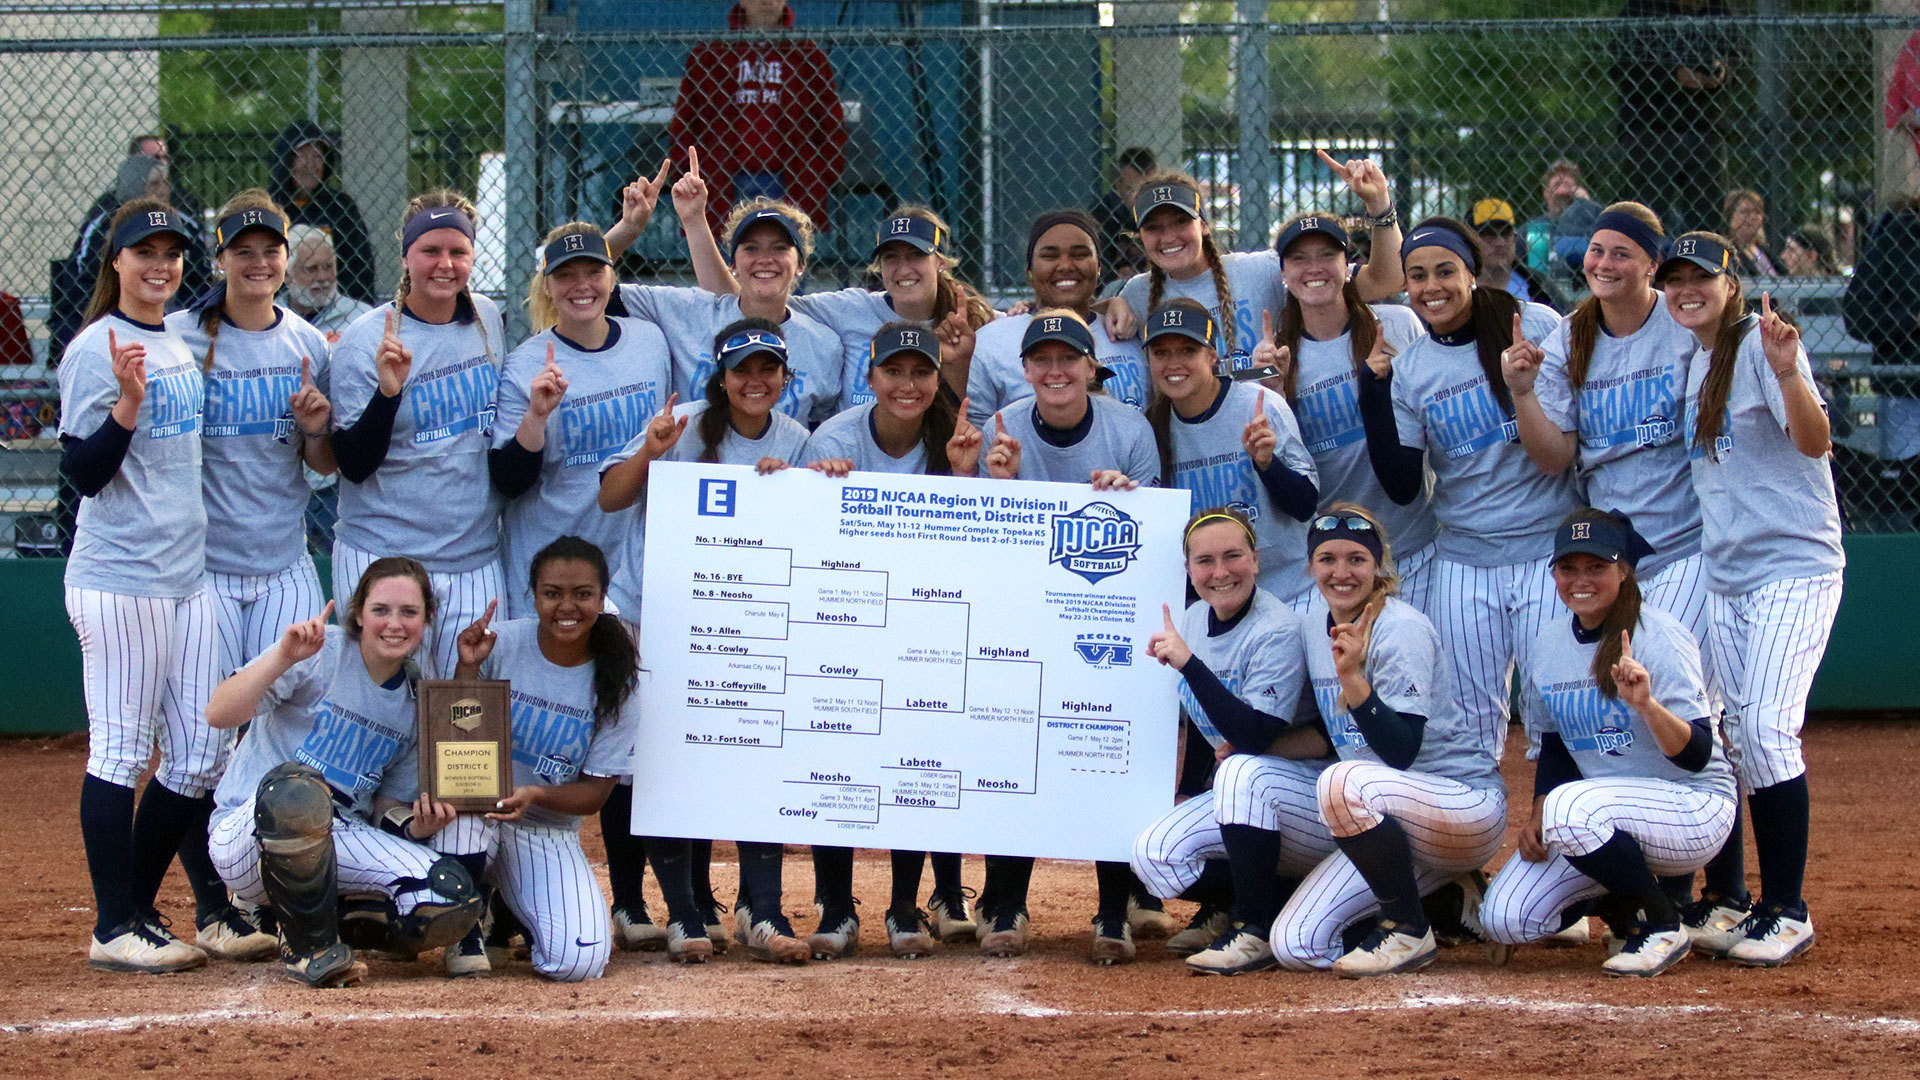 Highland Softball Wins Region Title to Earn Trip to Nationals